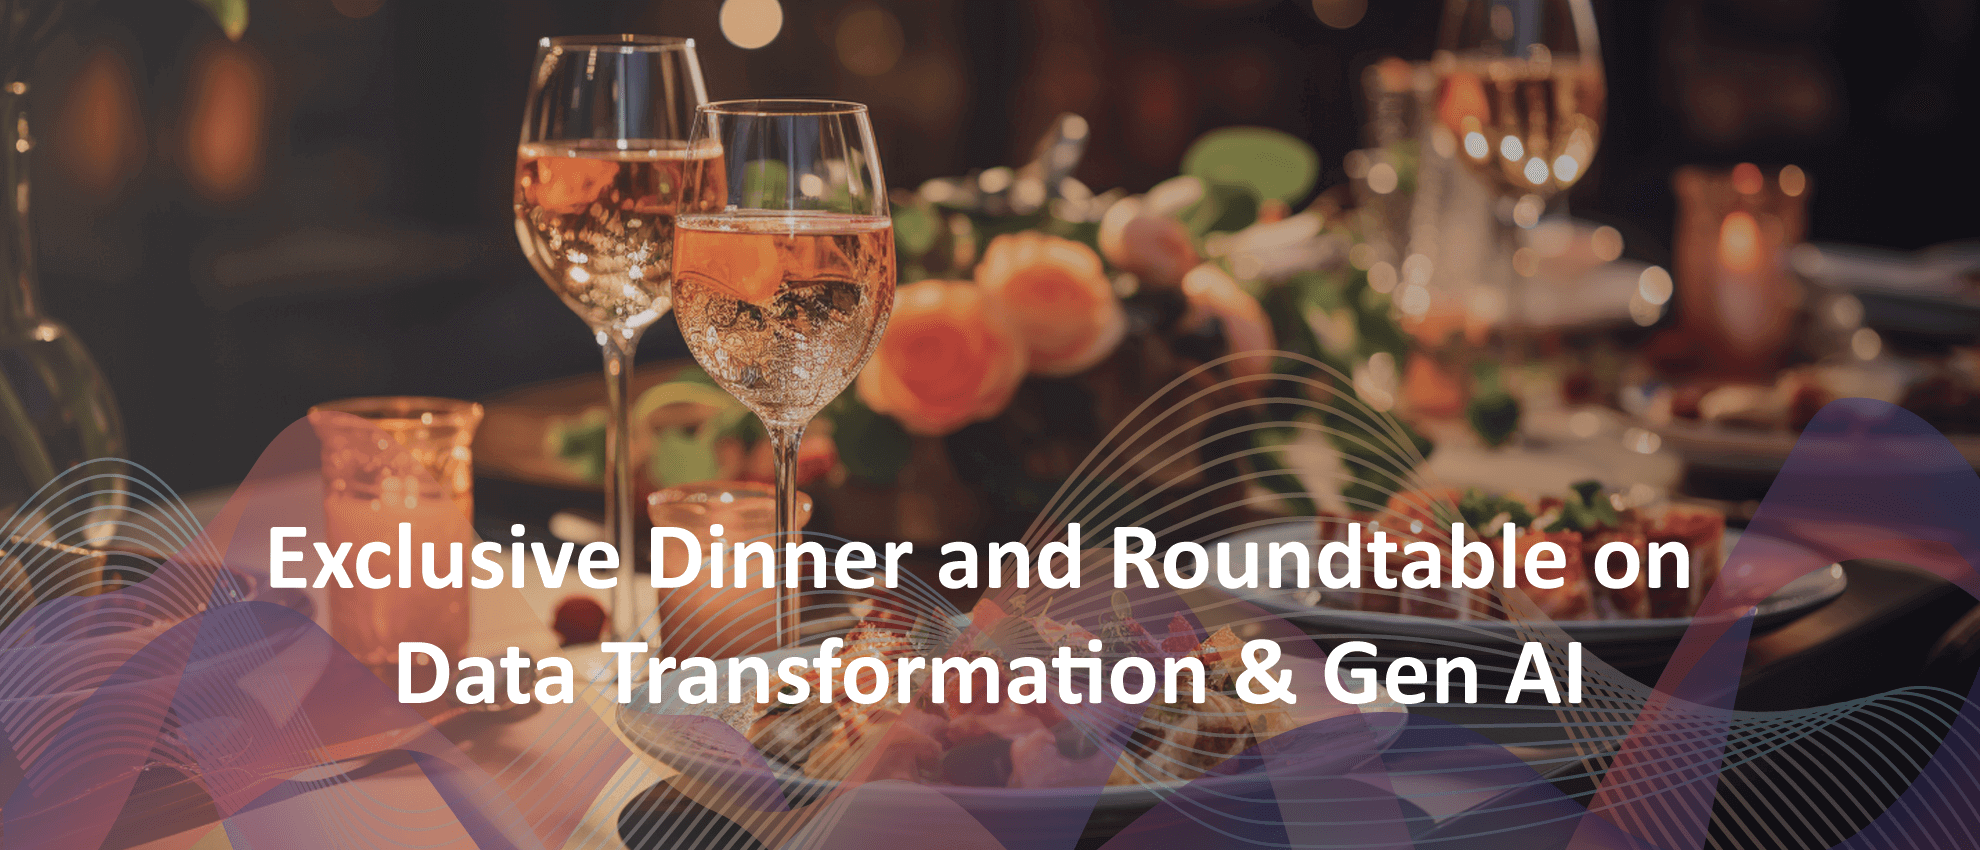 Exclusive Dinner and Roundtable on Data Transformation & GEN AI